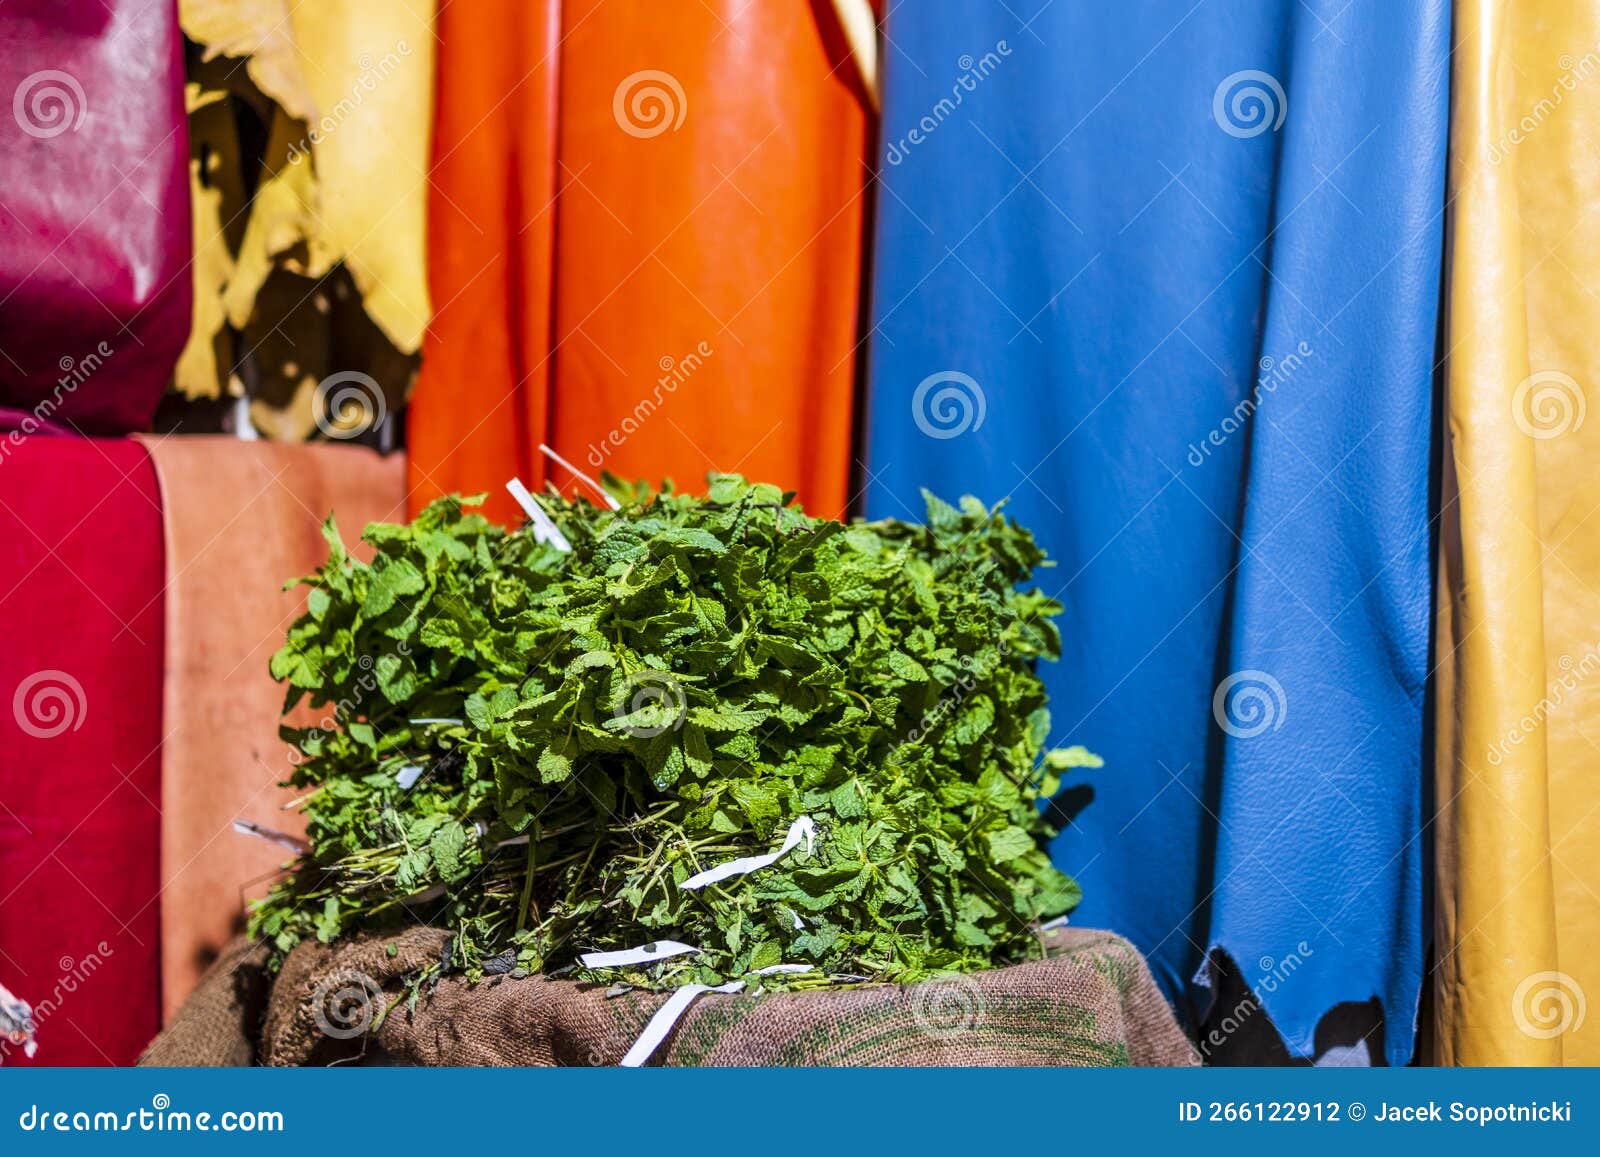 fresh mint leaves sold on the market with colorful leathers as the background, fes, morocco, africa